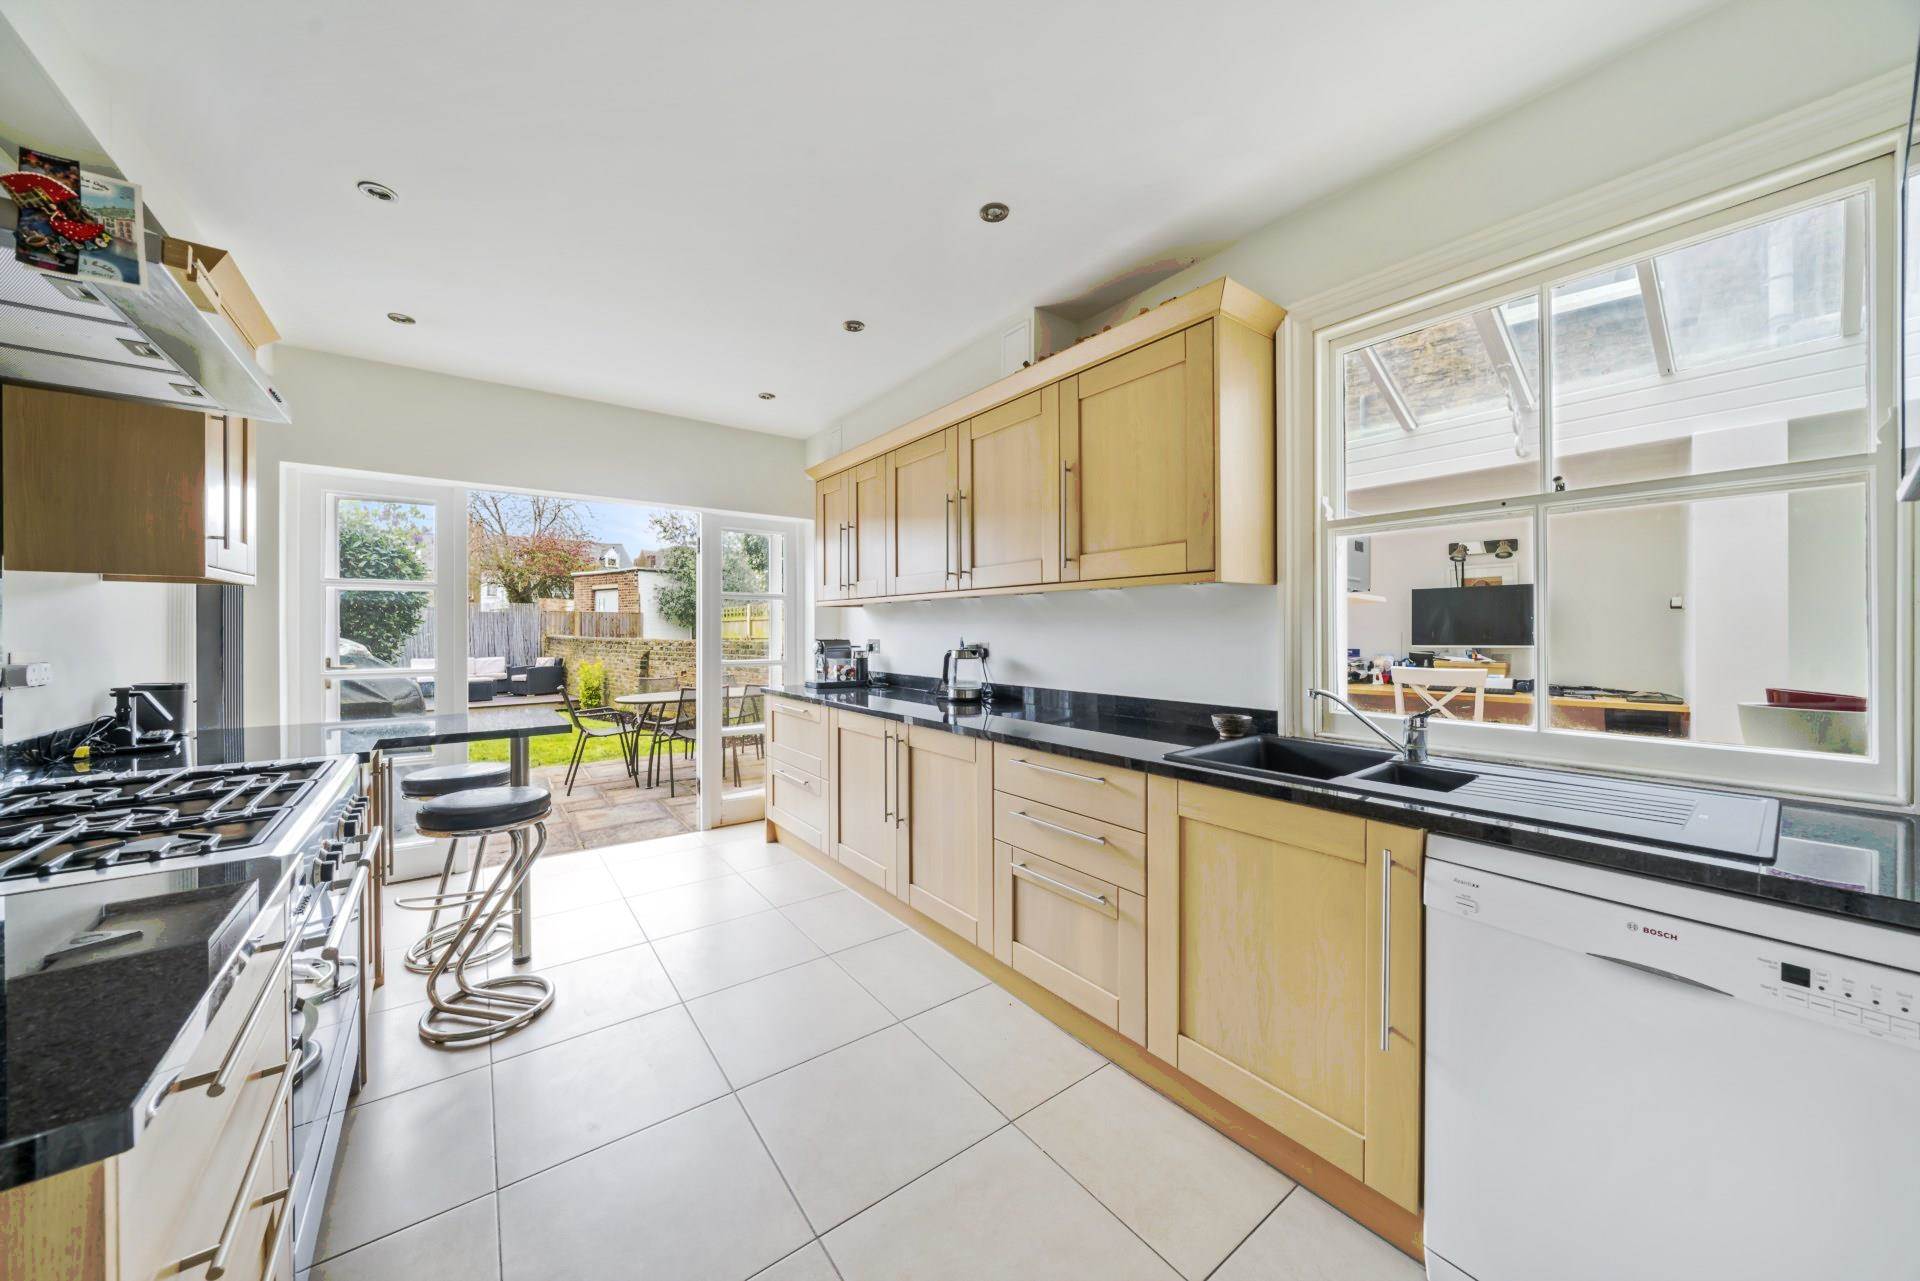 Beauval Rd, East Dulwich, SE22, Image 5